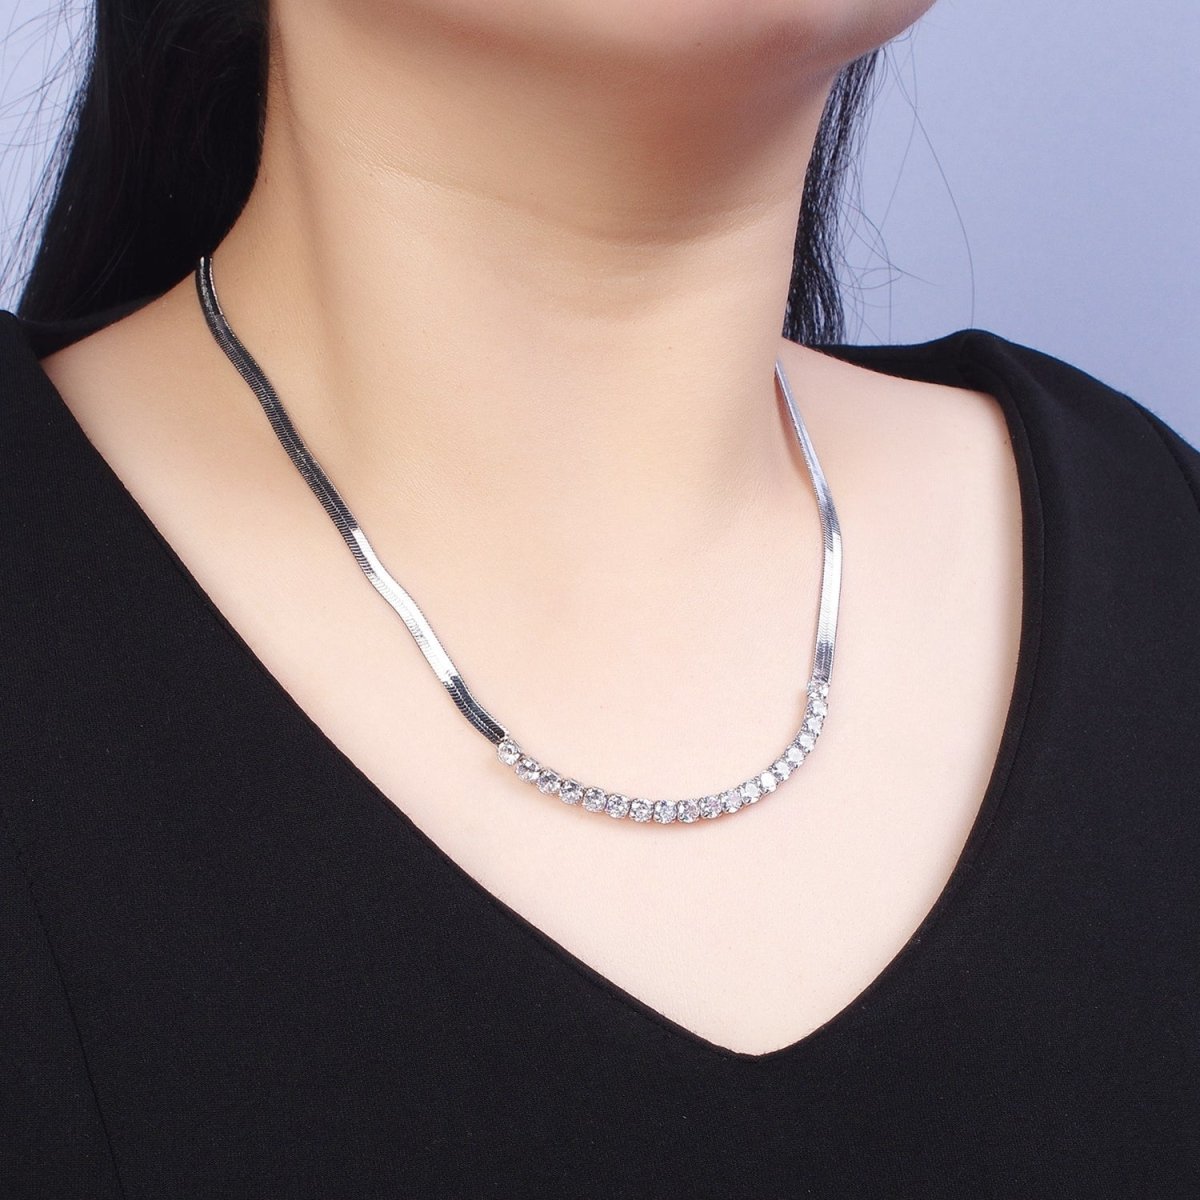 Dainty Gold Herringbone Necklace, Gold Flat Snake Chain Layered Choker, Cubic Zirconia Diamond Layer Chain Necklace for Her | WA-1086 WA-1087 Clearance Pricing - DLUXCA